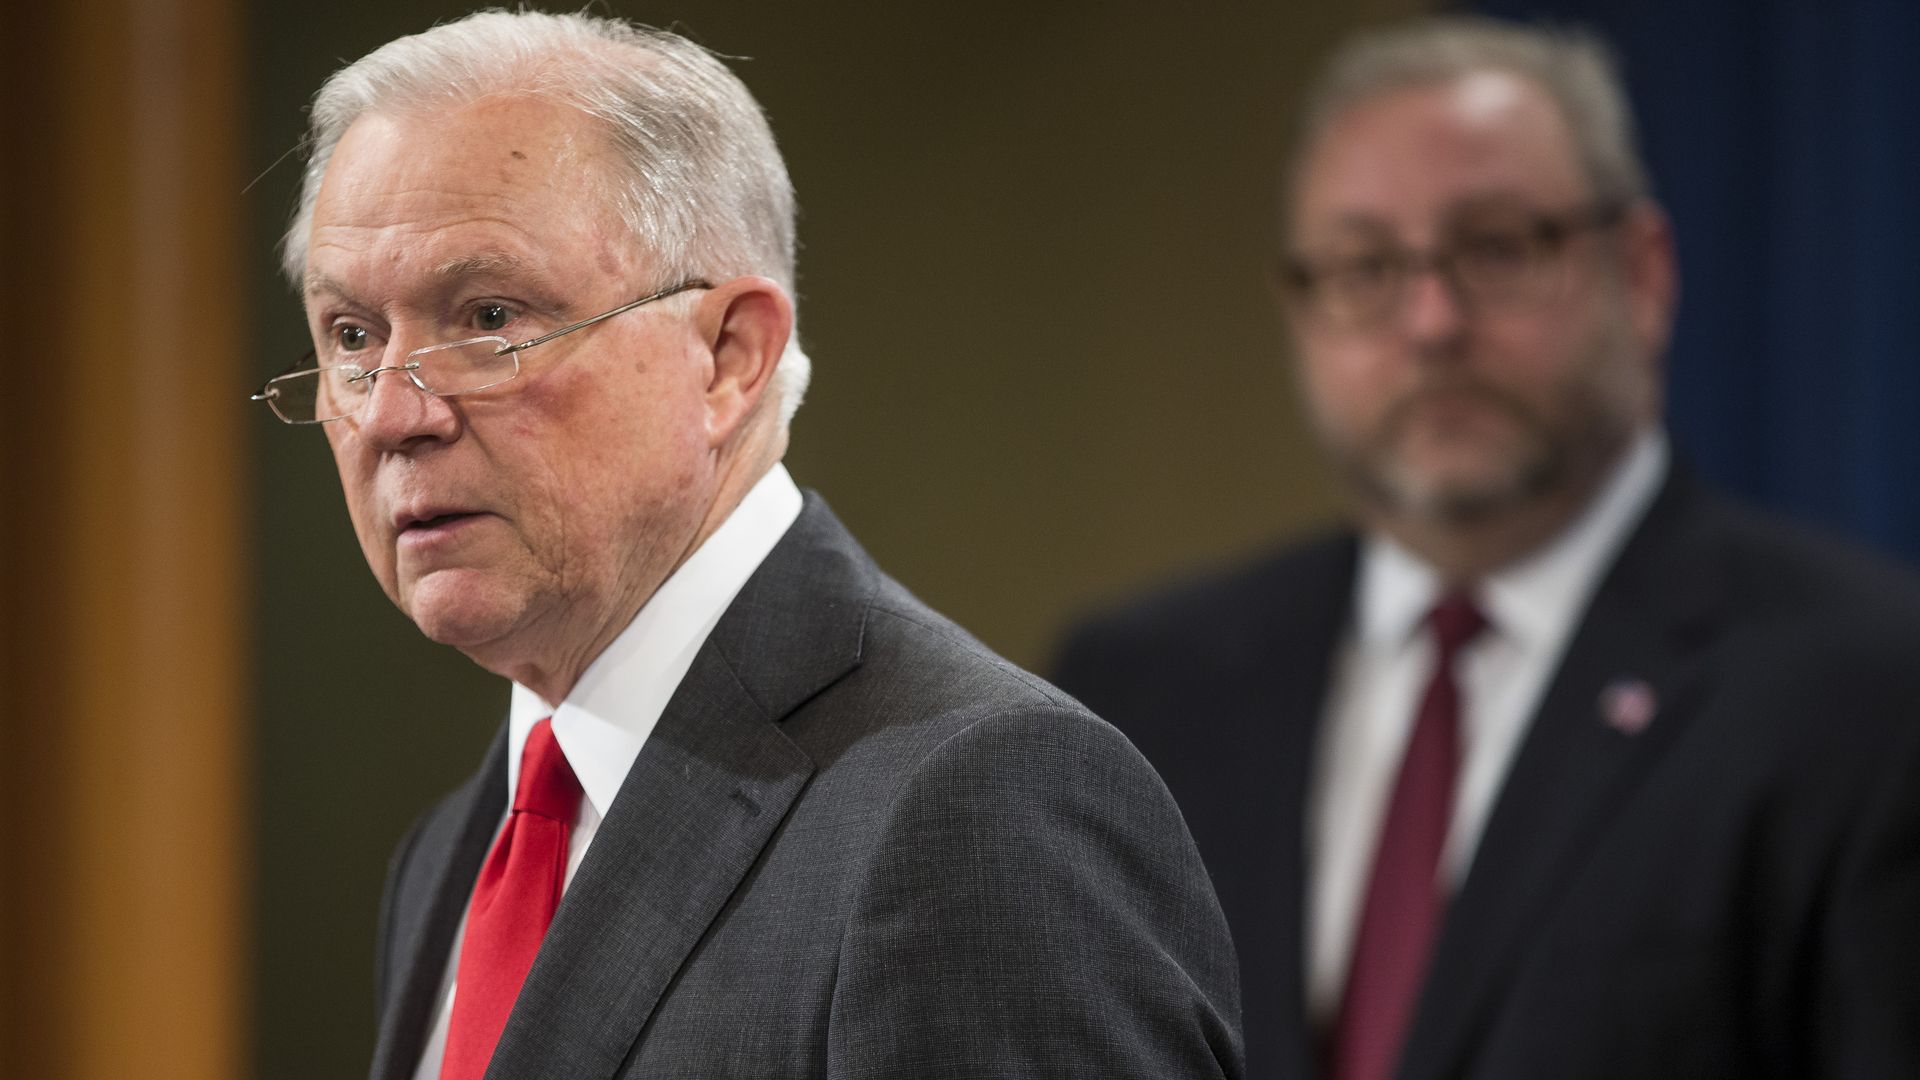 In this image, Jeff Sessions faces the left. He's wearing a red tie and a suit. 